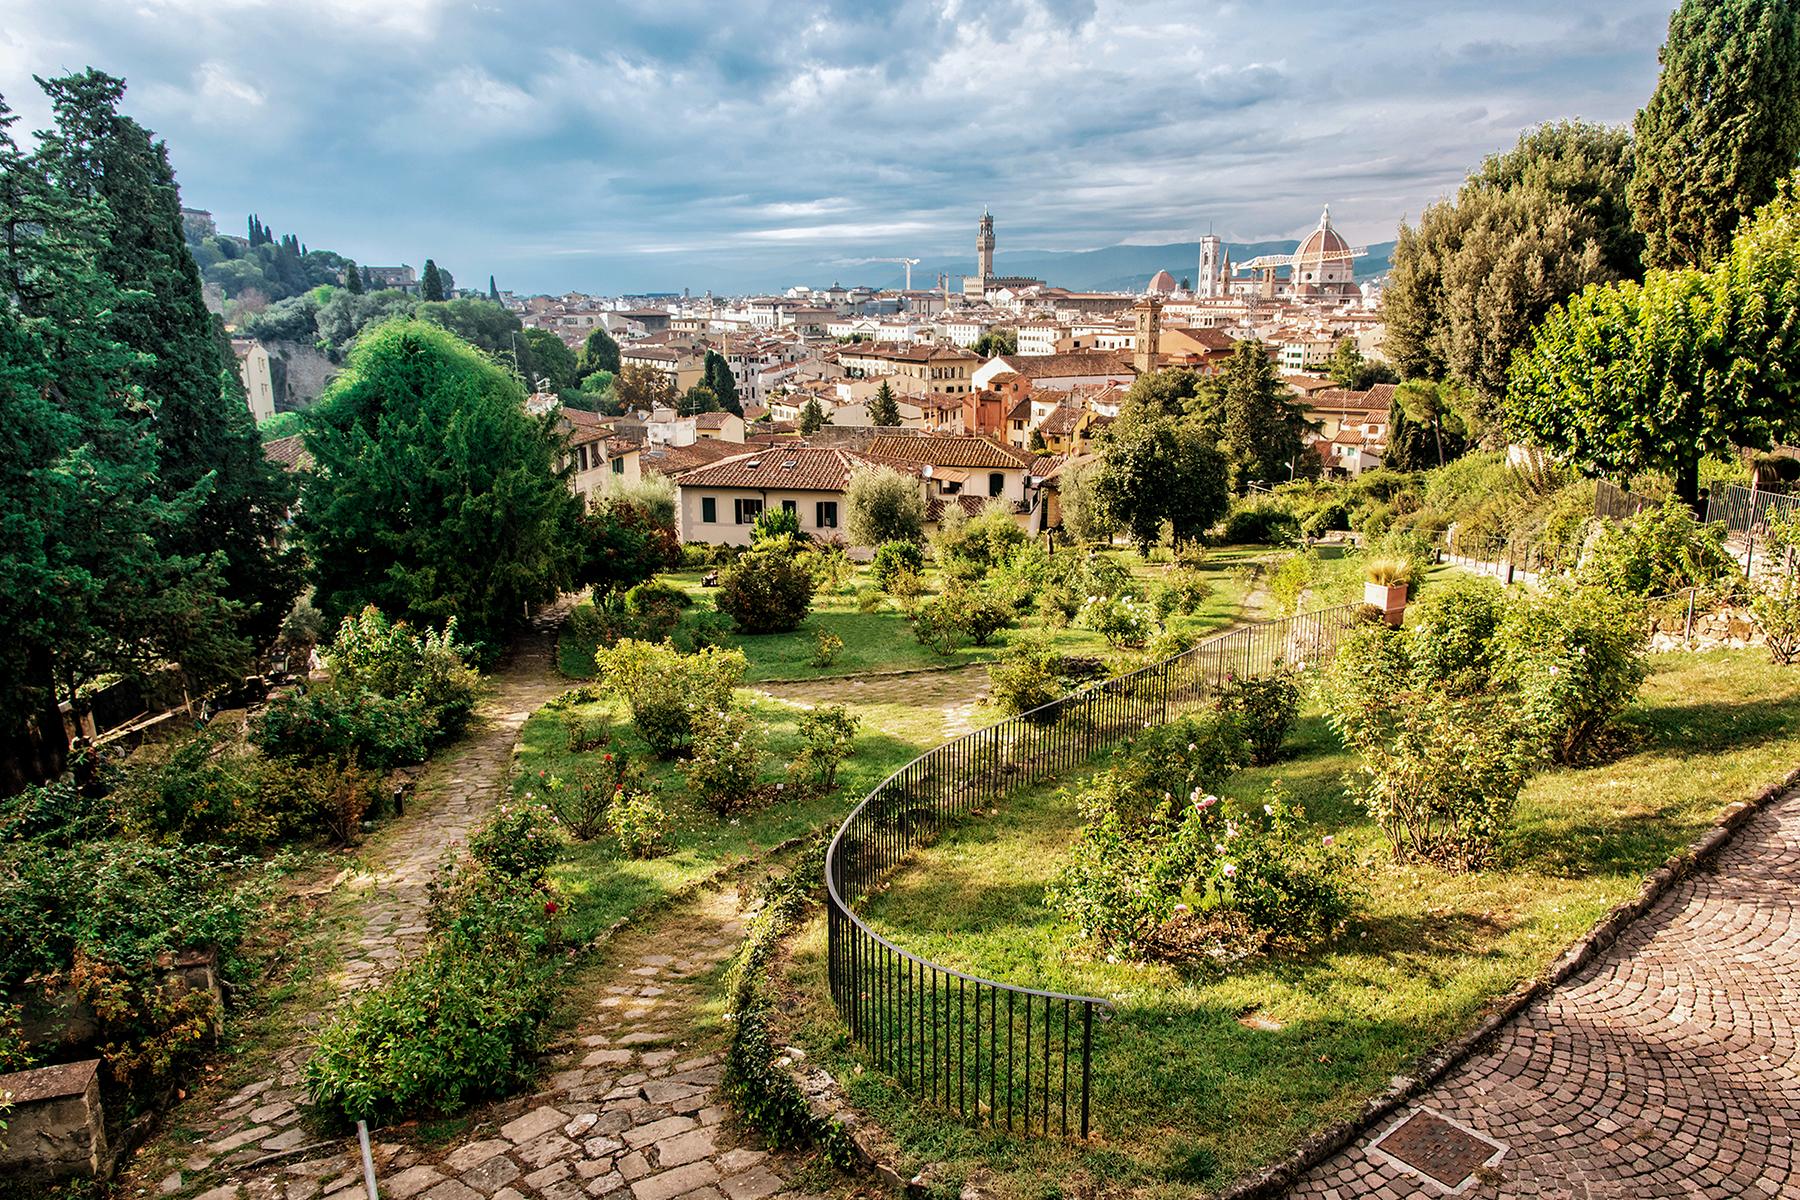 Free Attractions in Florence